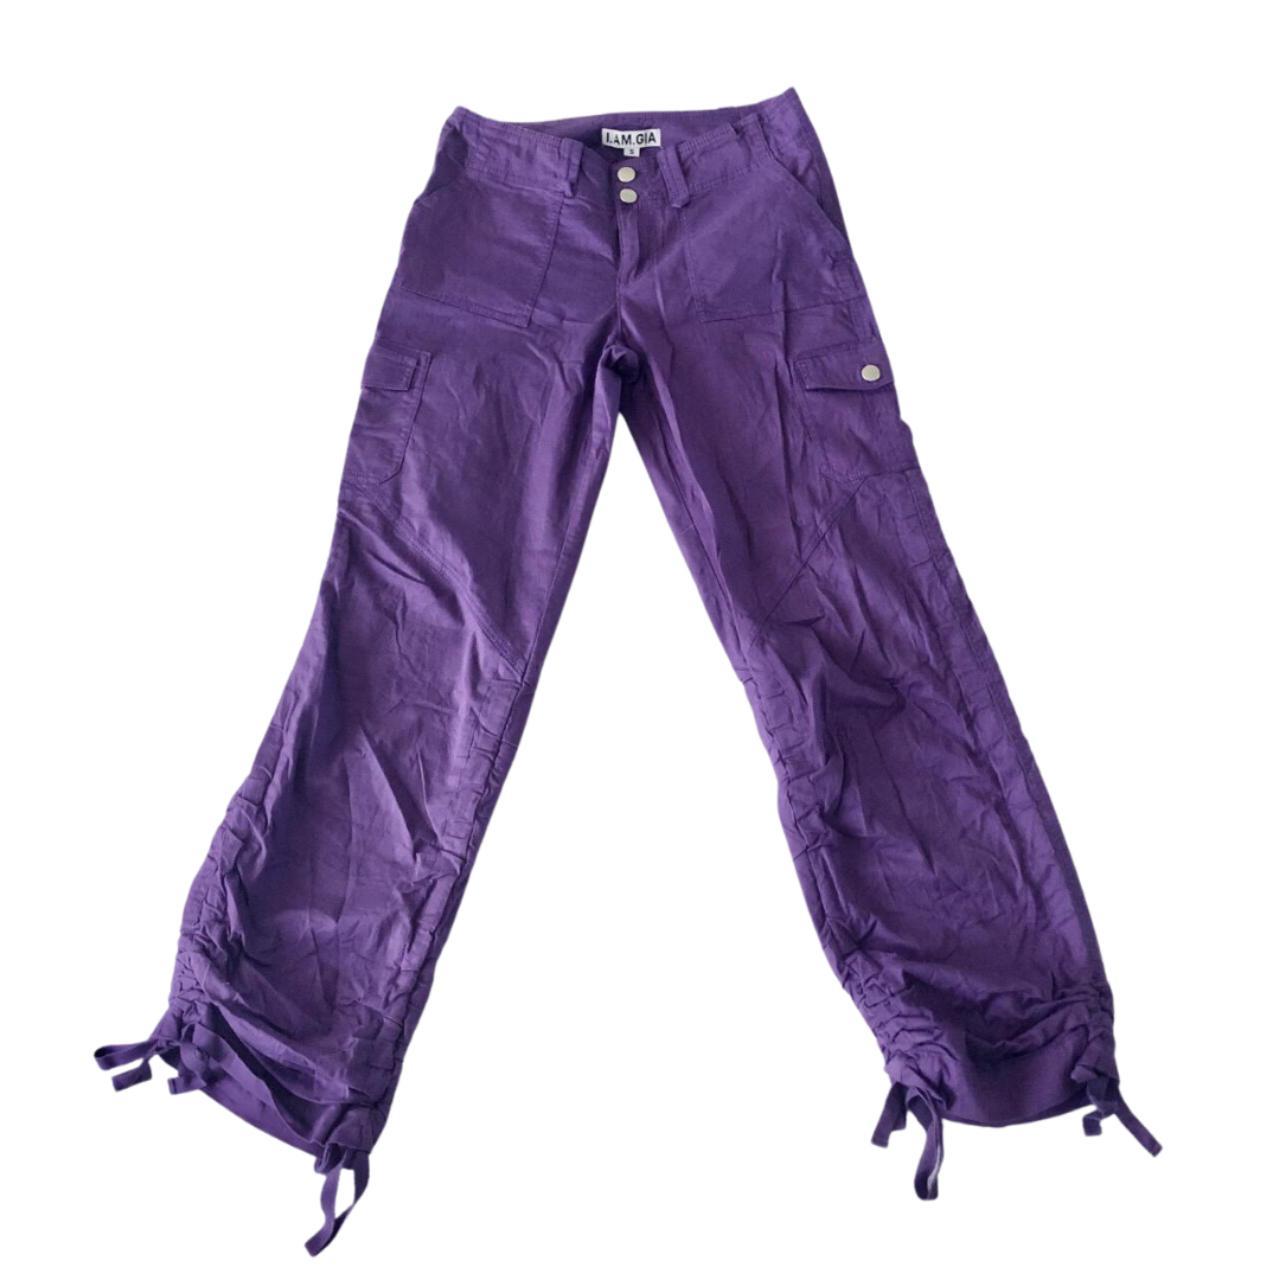 I.AM.GIA Purple Cargo Pants Sold out on website. - Depop